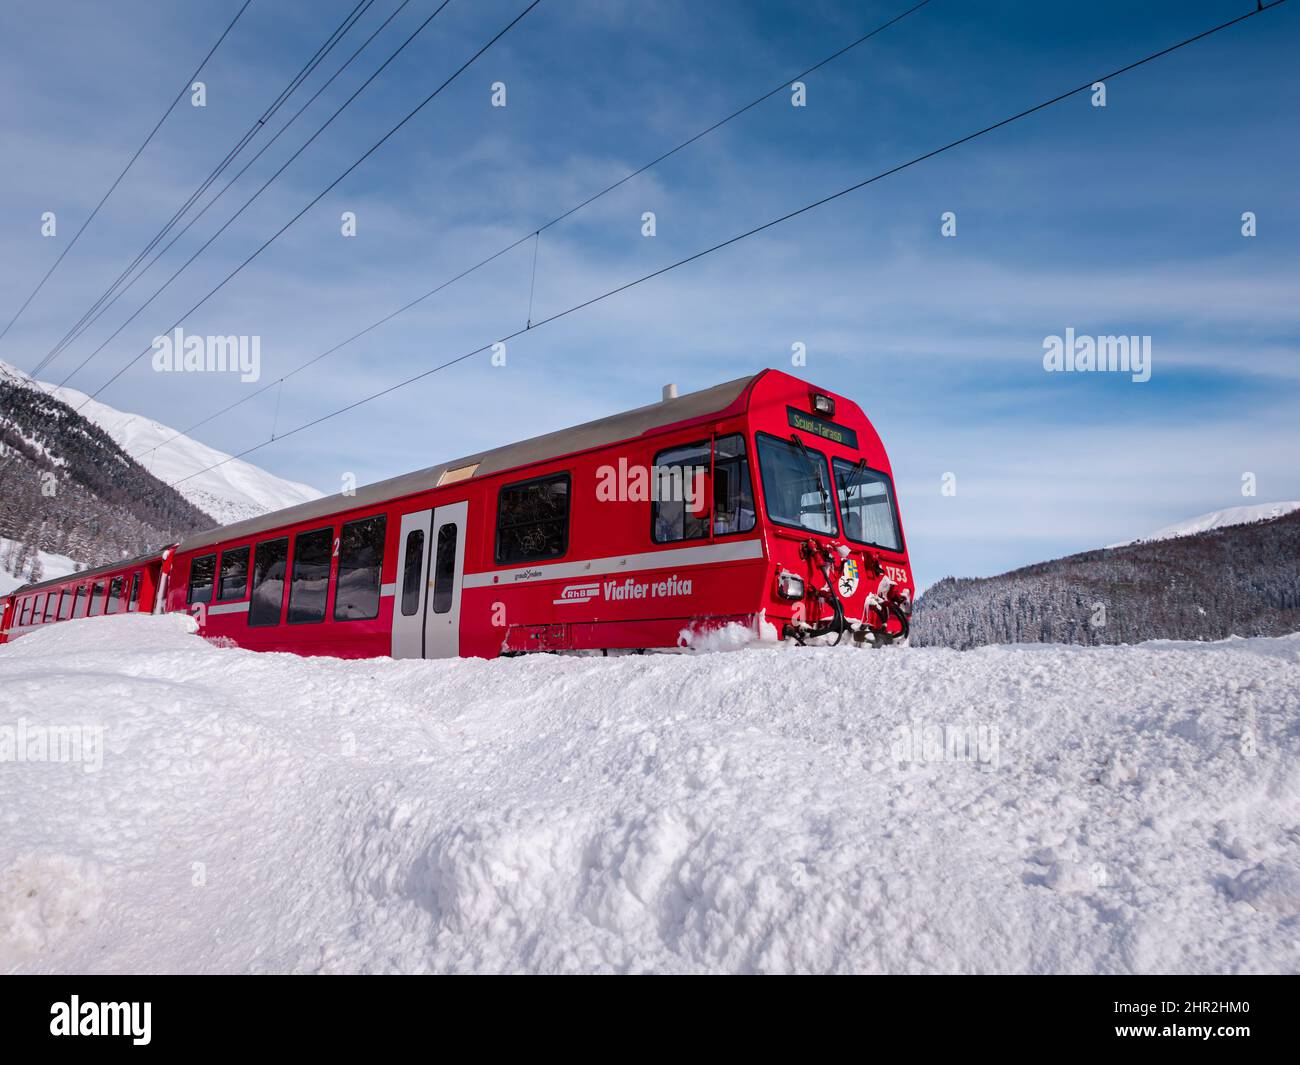 Cinuos-Chel, Switzerland - February 3, 2022: Red train of Viafier retica riding between Chur and Tirano in Italy and crossing snow covered landscape a Stock Photo